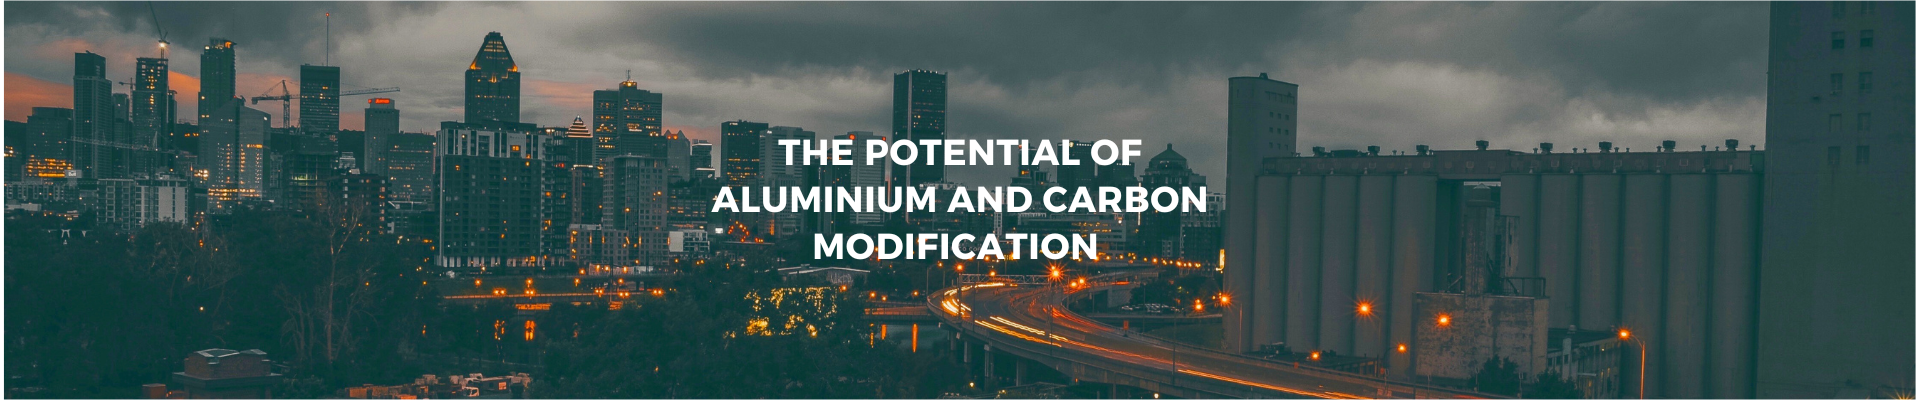 The potential of aluminium and carbon modification